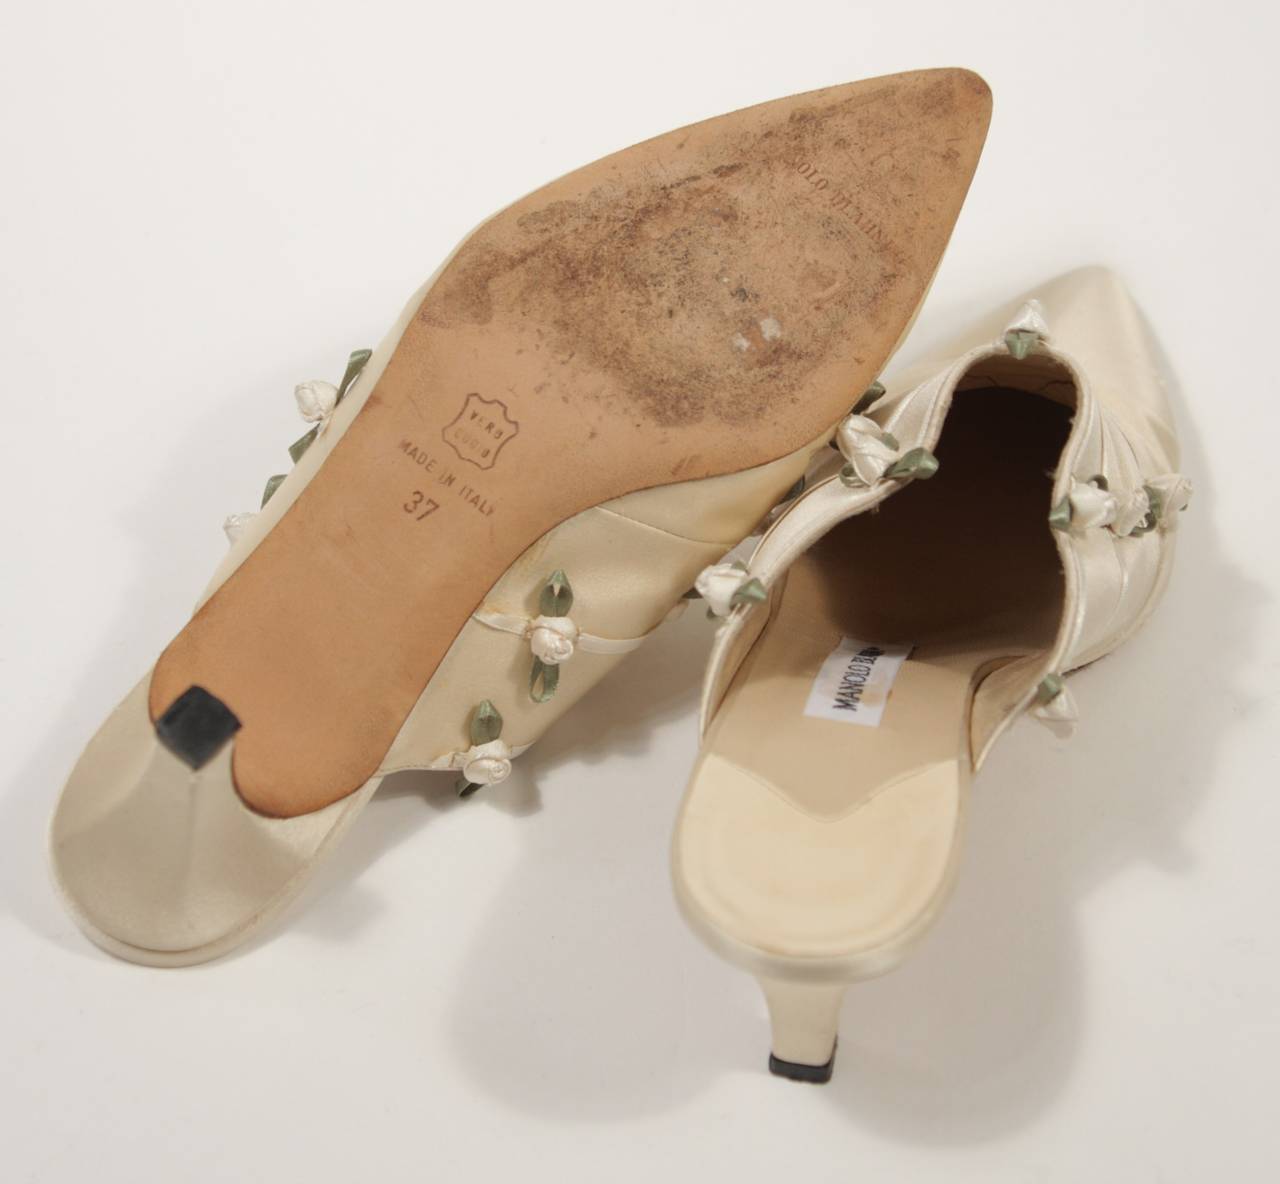 Manolo Blahnik Ivory Silk Bridal Shoe with Floral Accents Size 7 1